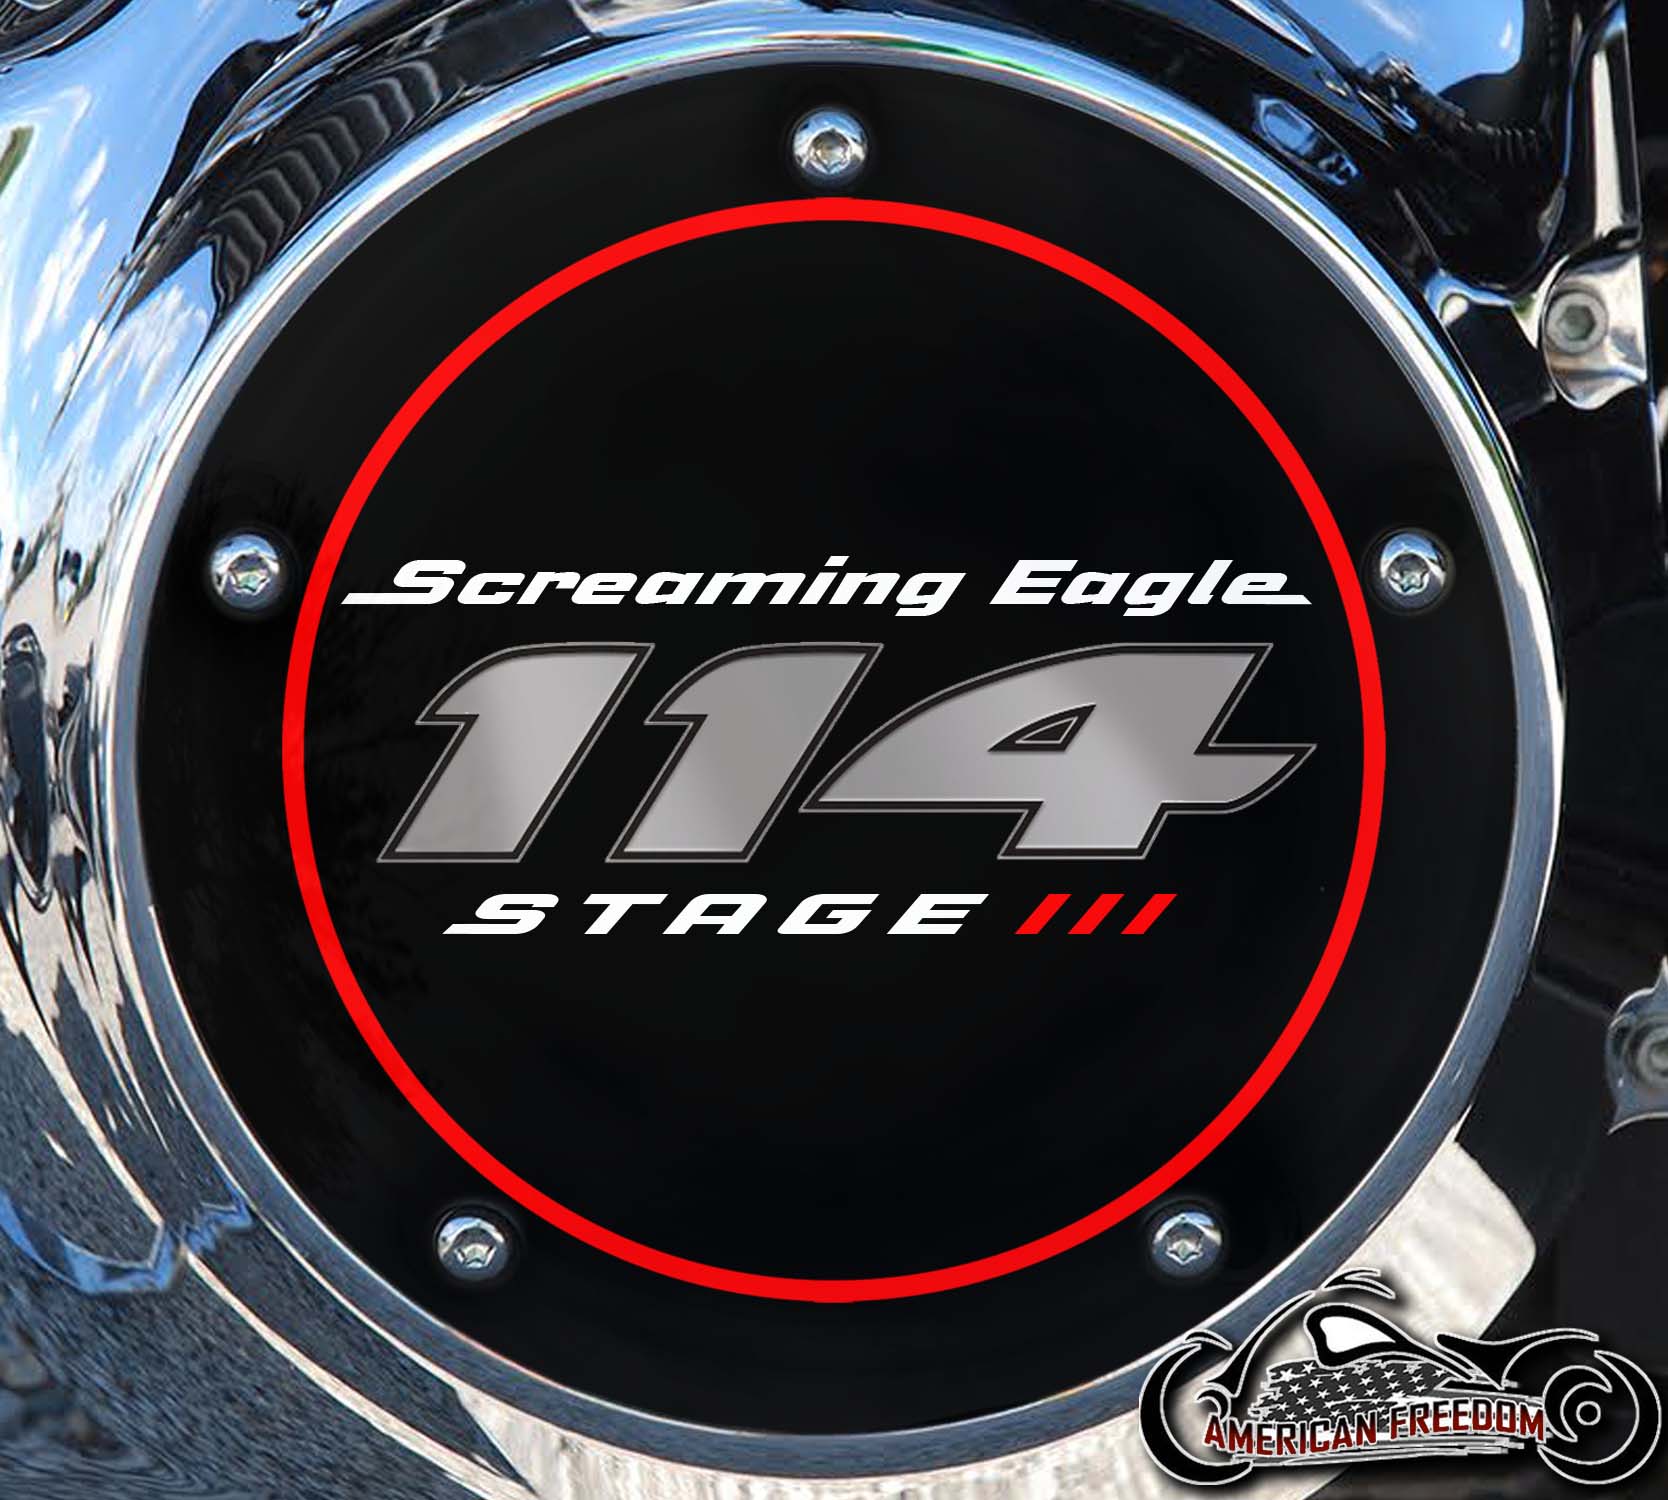 Screaming Eagle Stage III 114 DERBY COVER OL - Click Image to Close